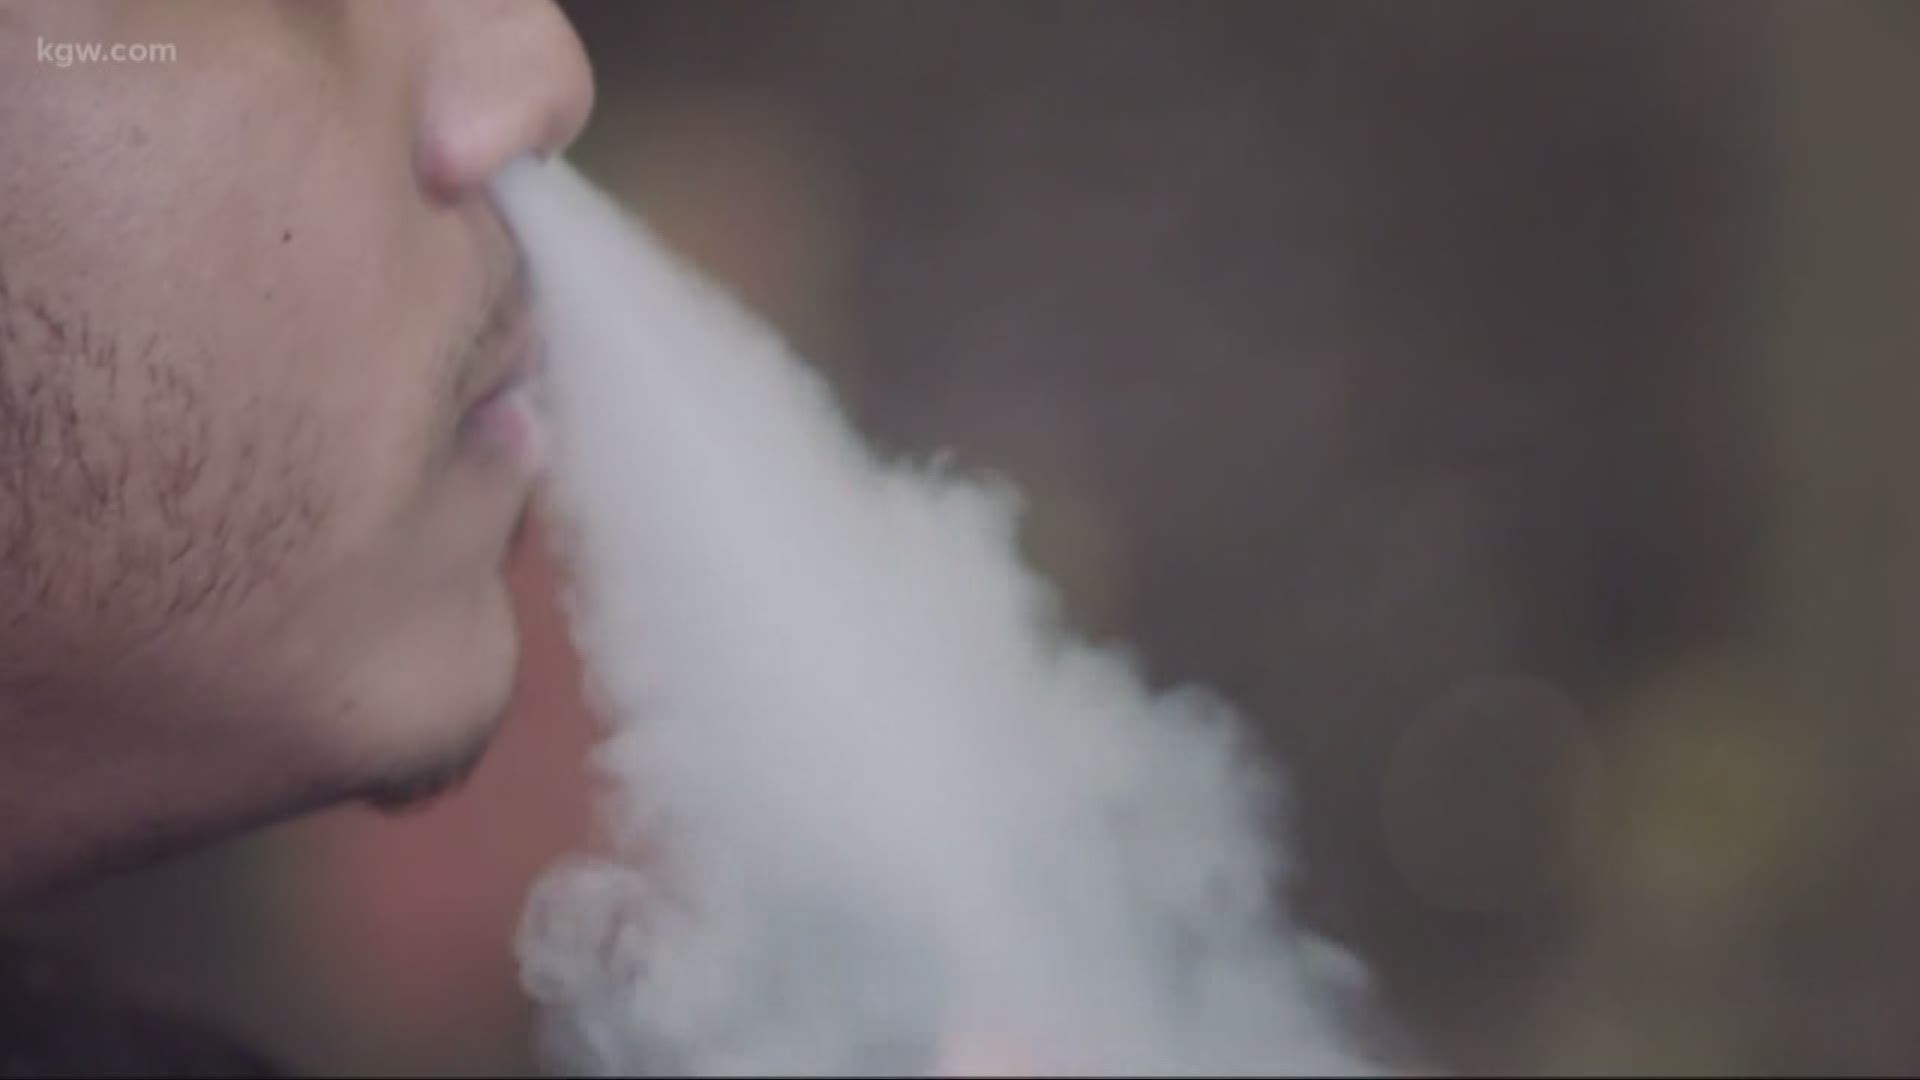 Mystery illness related to vaping has killed six people in six states